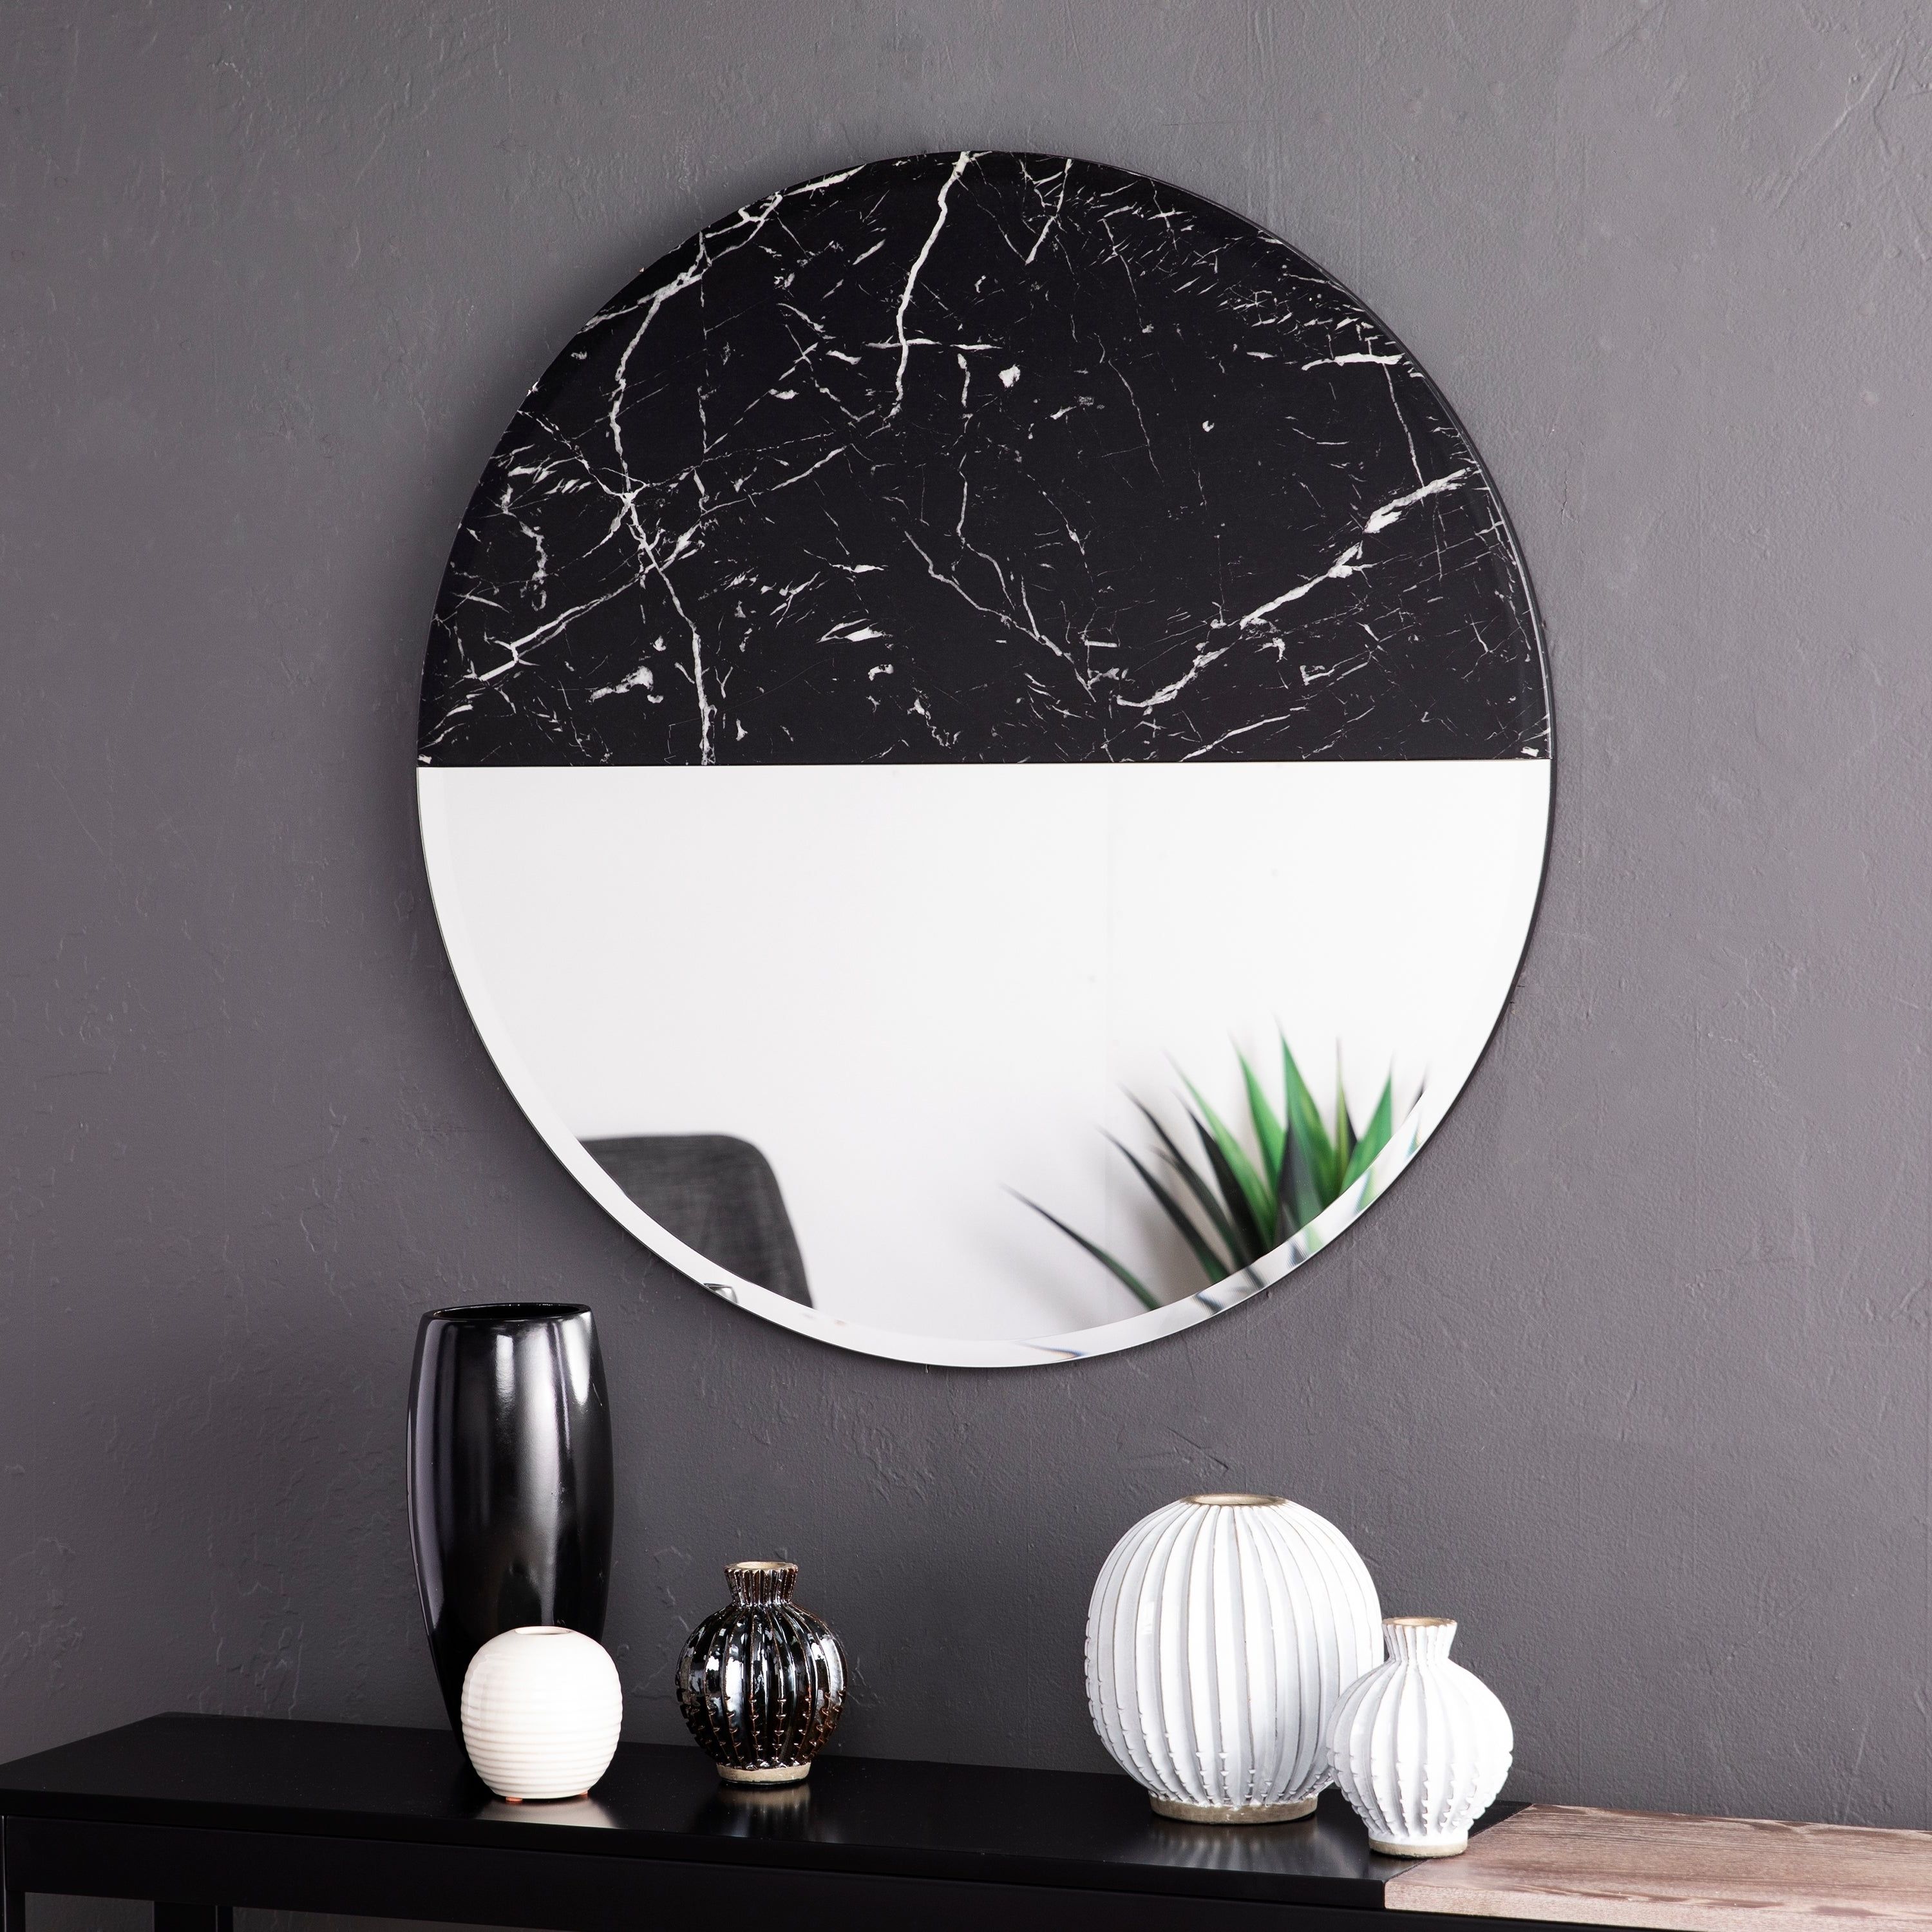 Widely Used Black Decorative Wall Mirrors Intended For Silver Orchid Kelley Round Decorative Wall Mirror – Black (View 11 of 20)